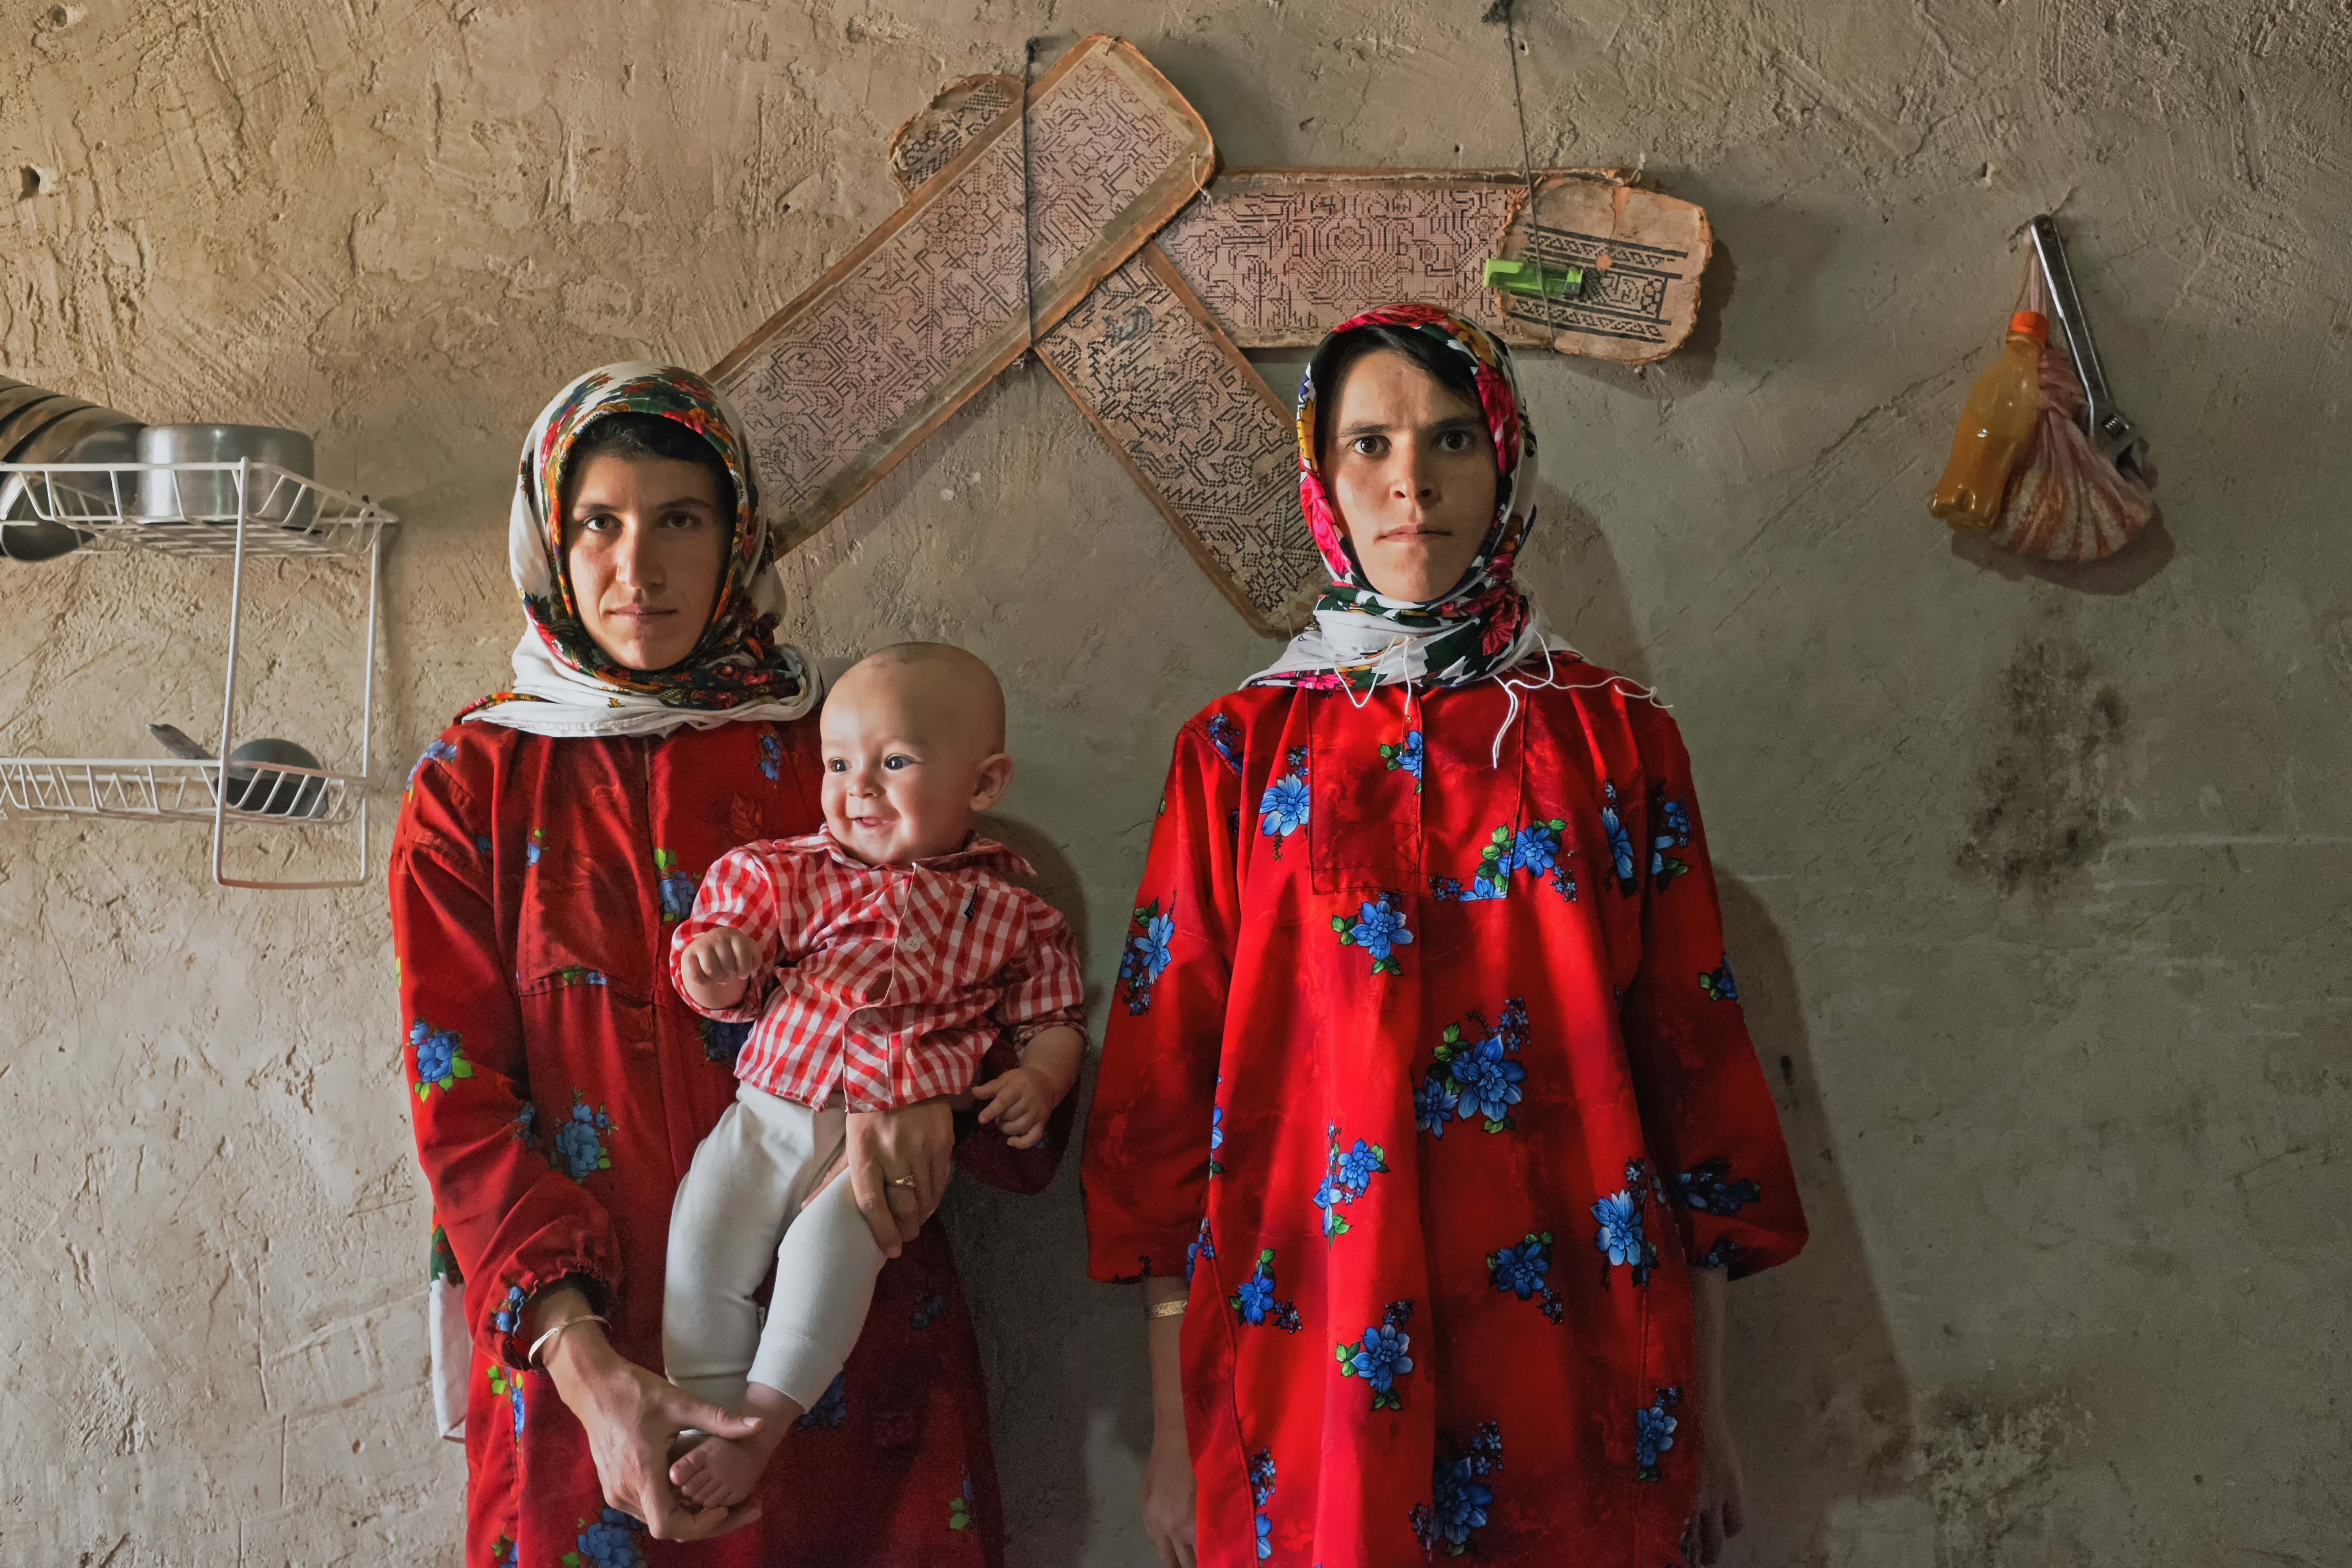 Roghayyeh stands beside Azar her sister-in-law who is holding her son. They weave the carpet in their free time, carpet drafts are seen behind them. Ajabshir, East Azerbaijan, Iran.